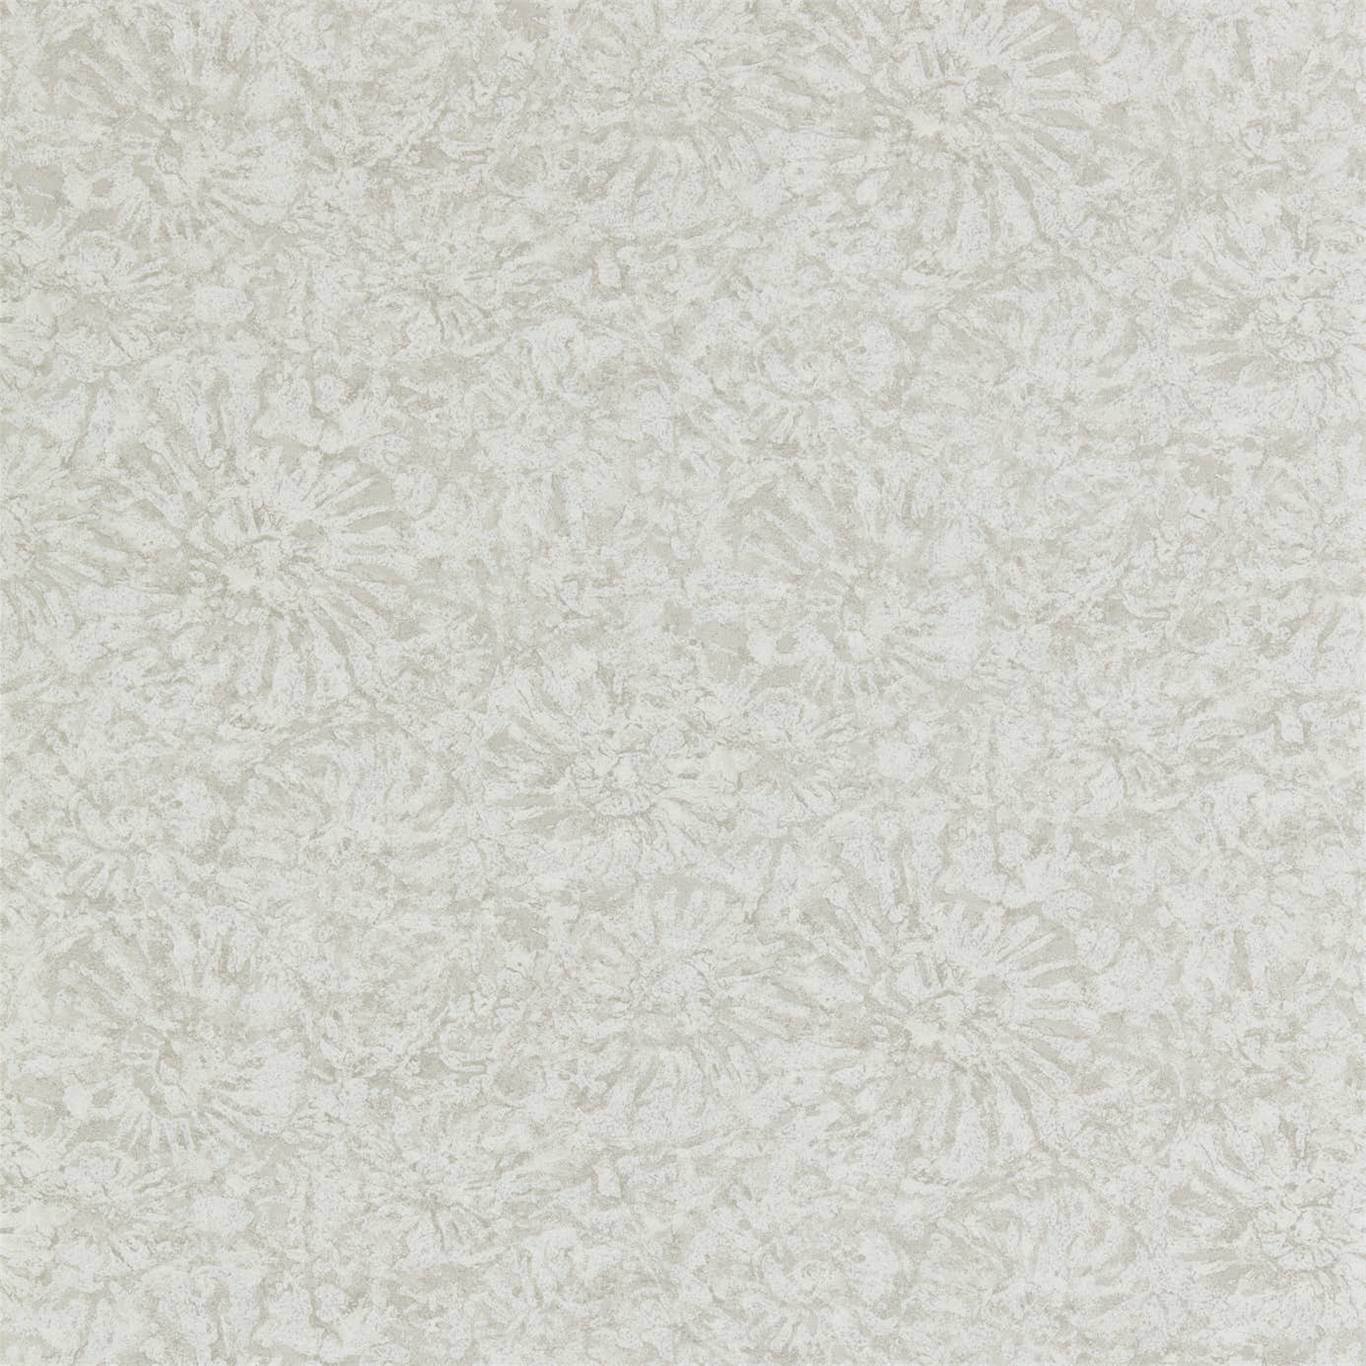 Anthology Ammonite Pumice Wallpaper by HAR